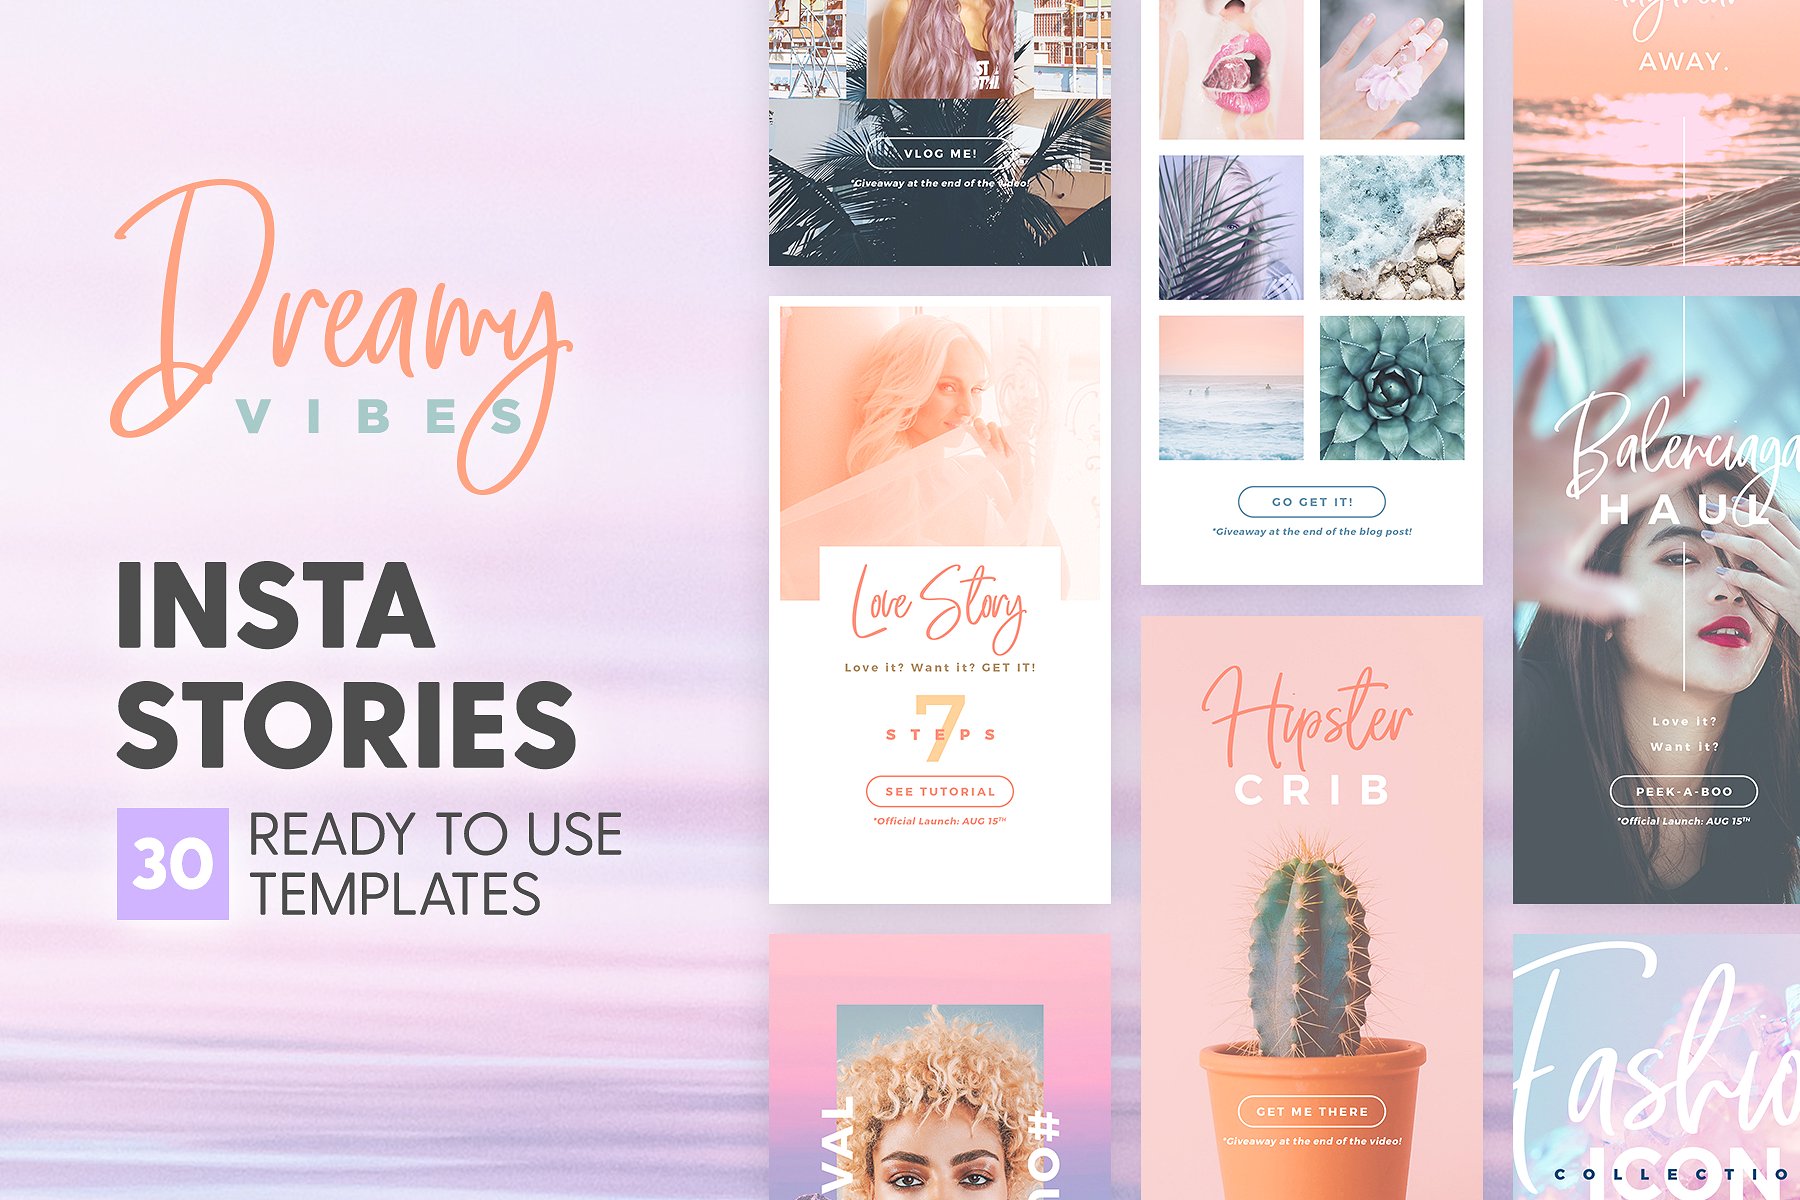 Instagram Stories Templates: Dreamy Vibes